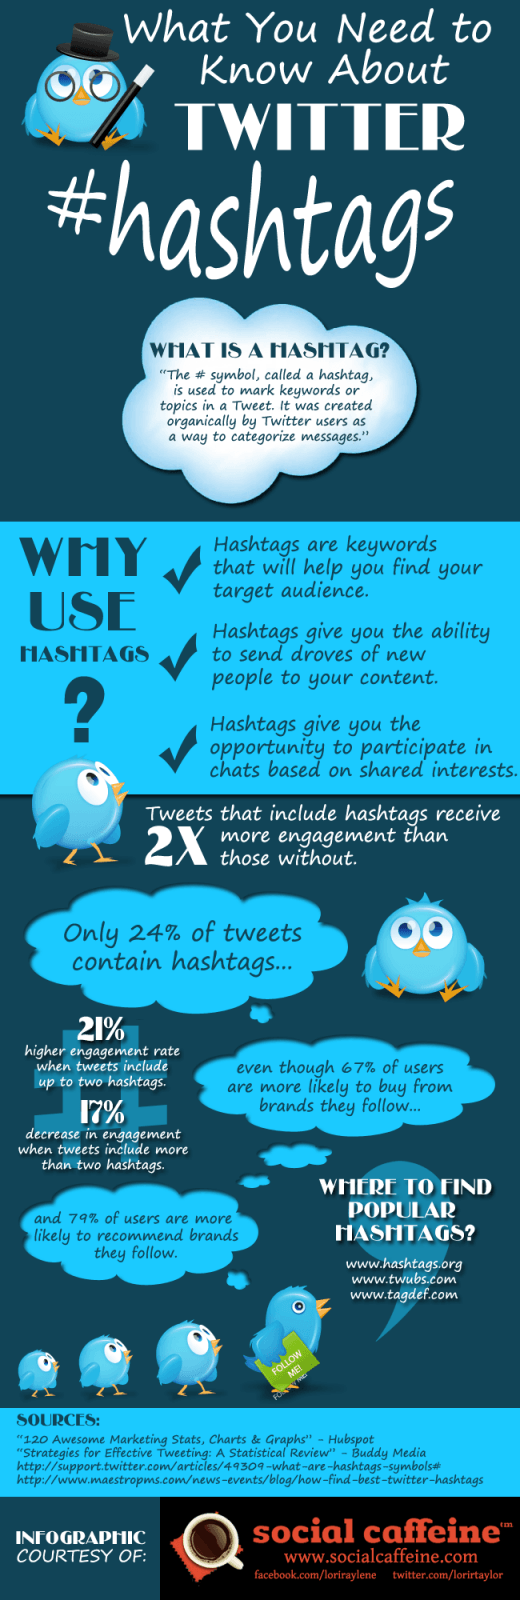 What You Need To Know About Twitter Hashtags [Infographic]